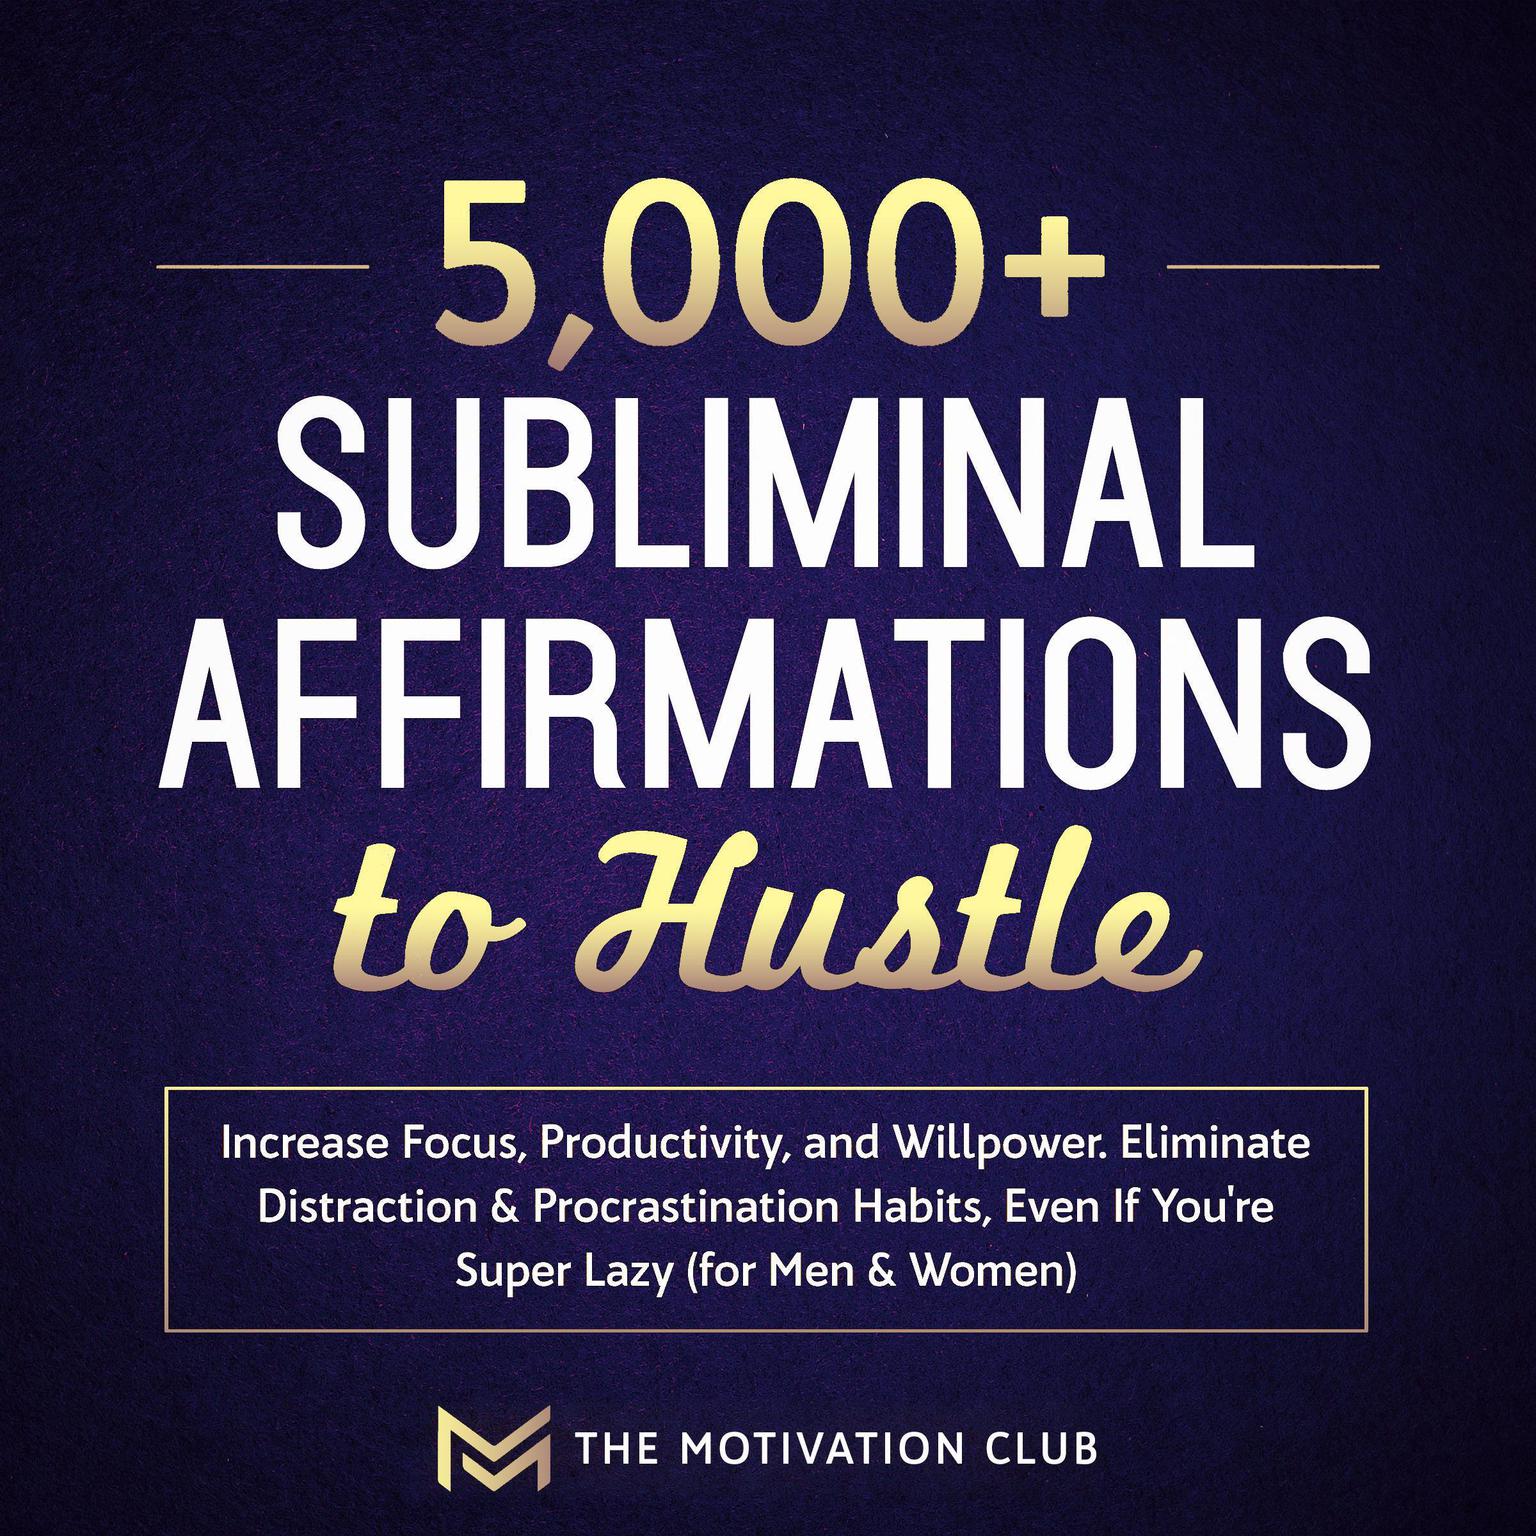 5,000+ Subliminal Affirmations to Hustle, Increase Focus, Productivity, and Willpower: Eliminate Distraction & Procrastination Habits Even If You’re Super Lazy (for Men & Women) Audiobook, by The Motivation Club